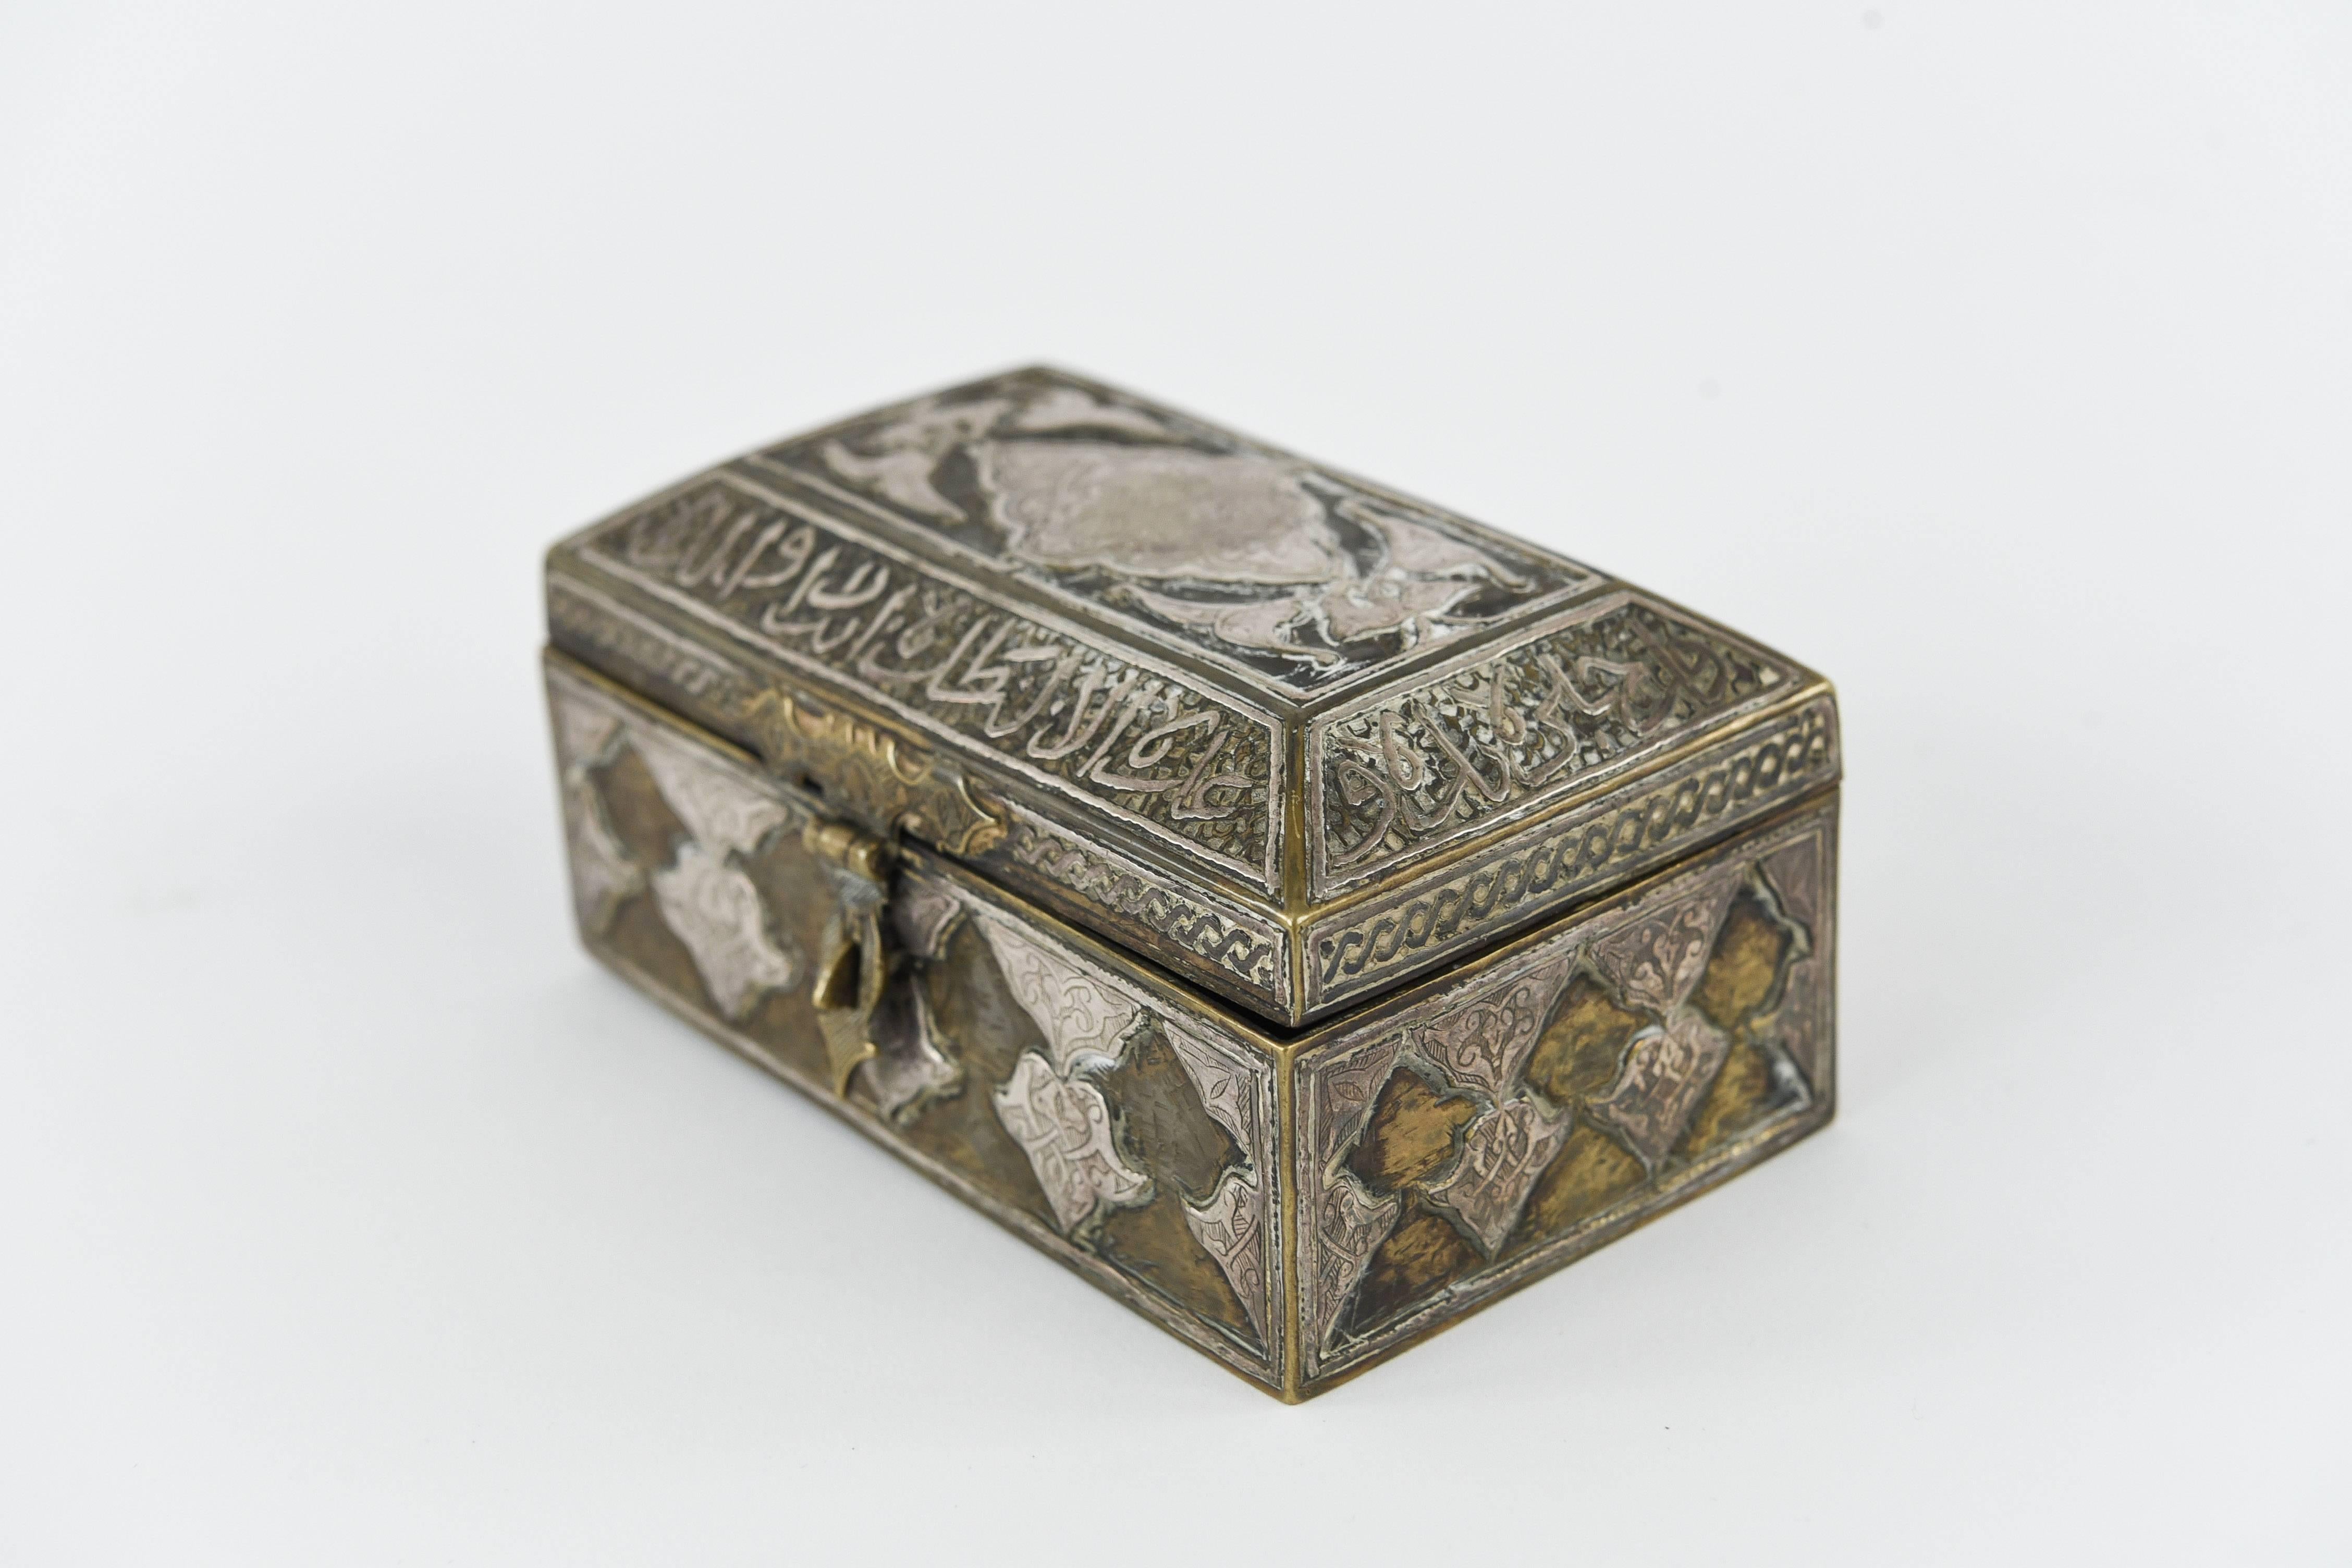 A beautiful inlaid trinket box, inlaid with silver.